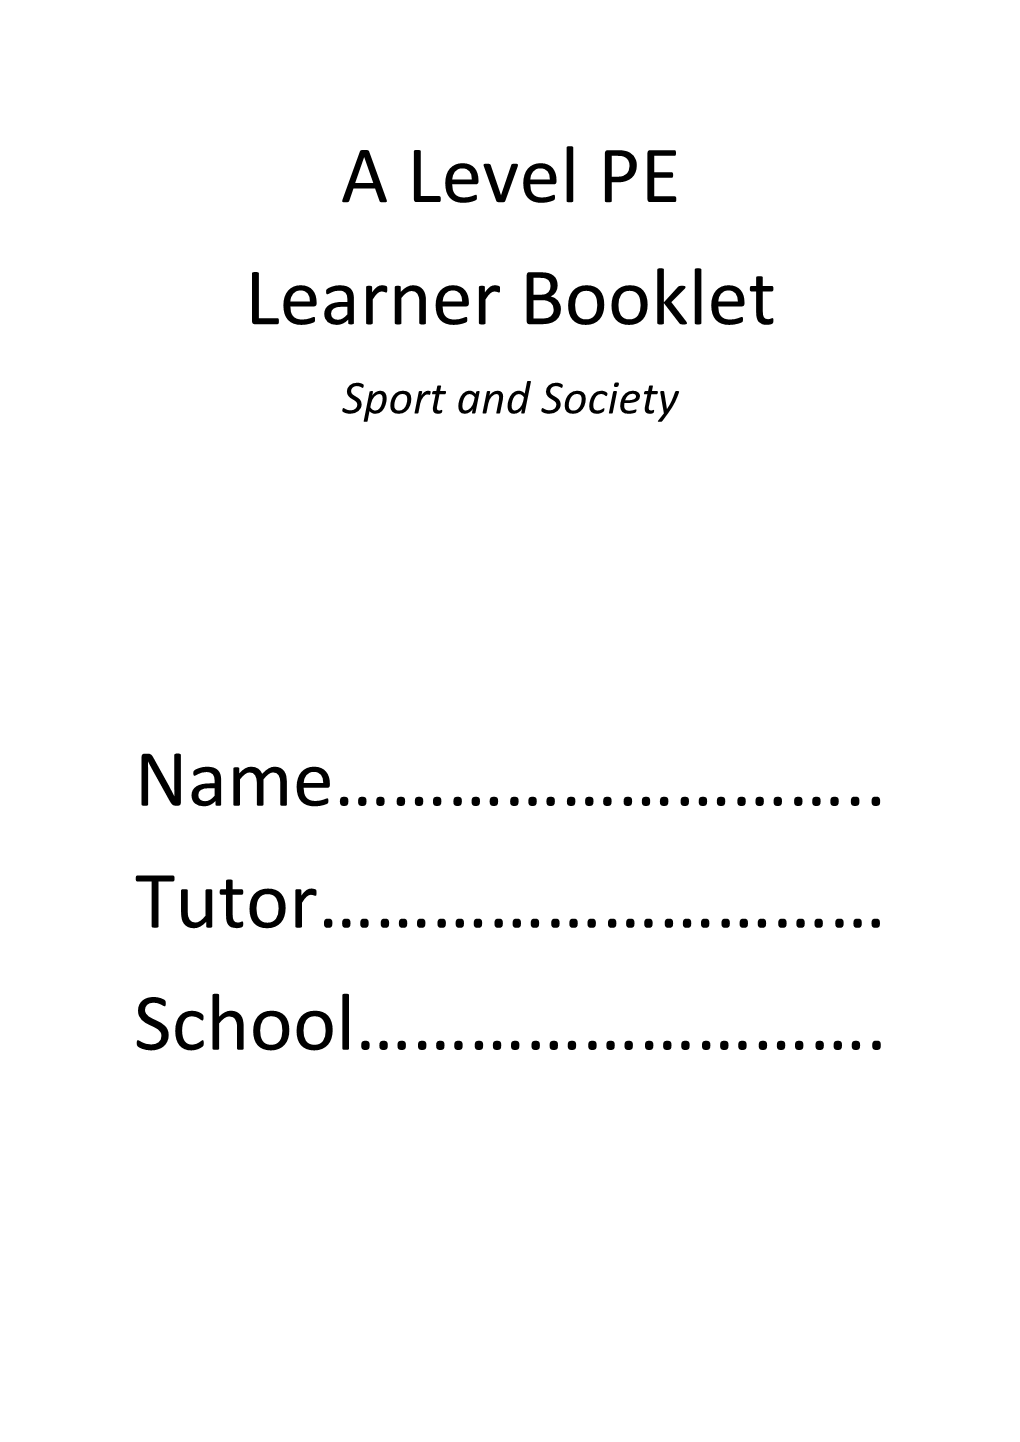 A Level PE Learner Booklet Name………………………